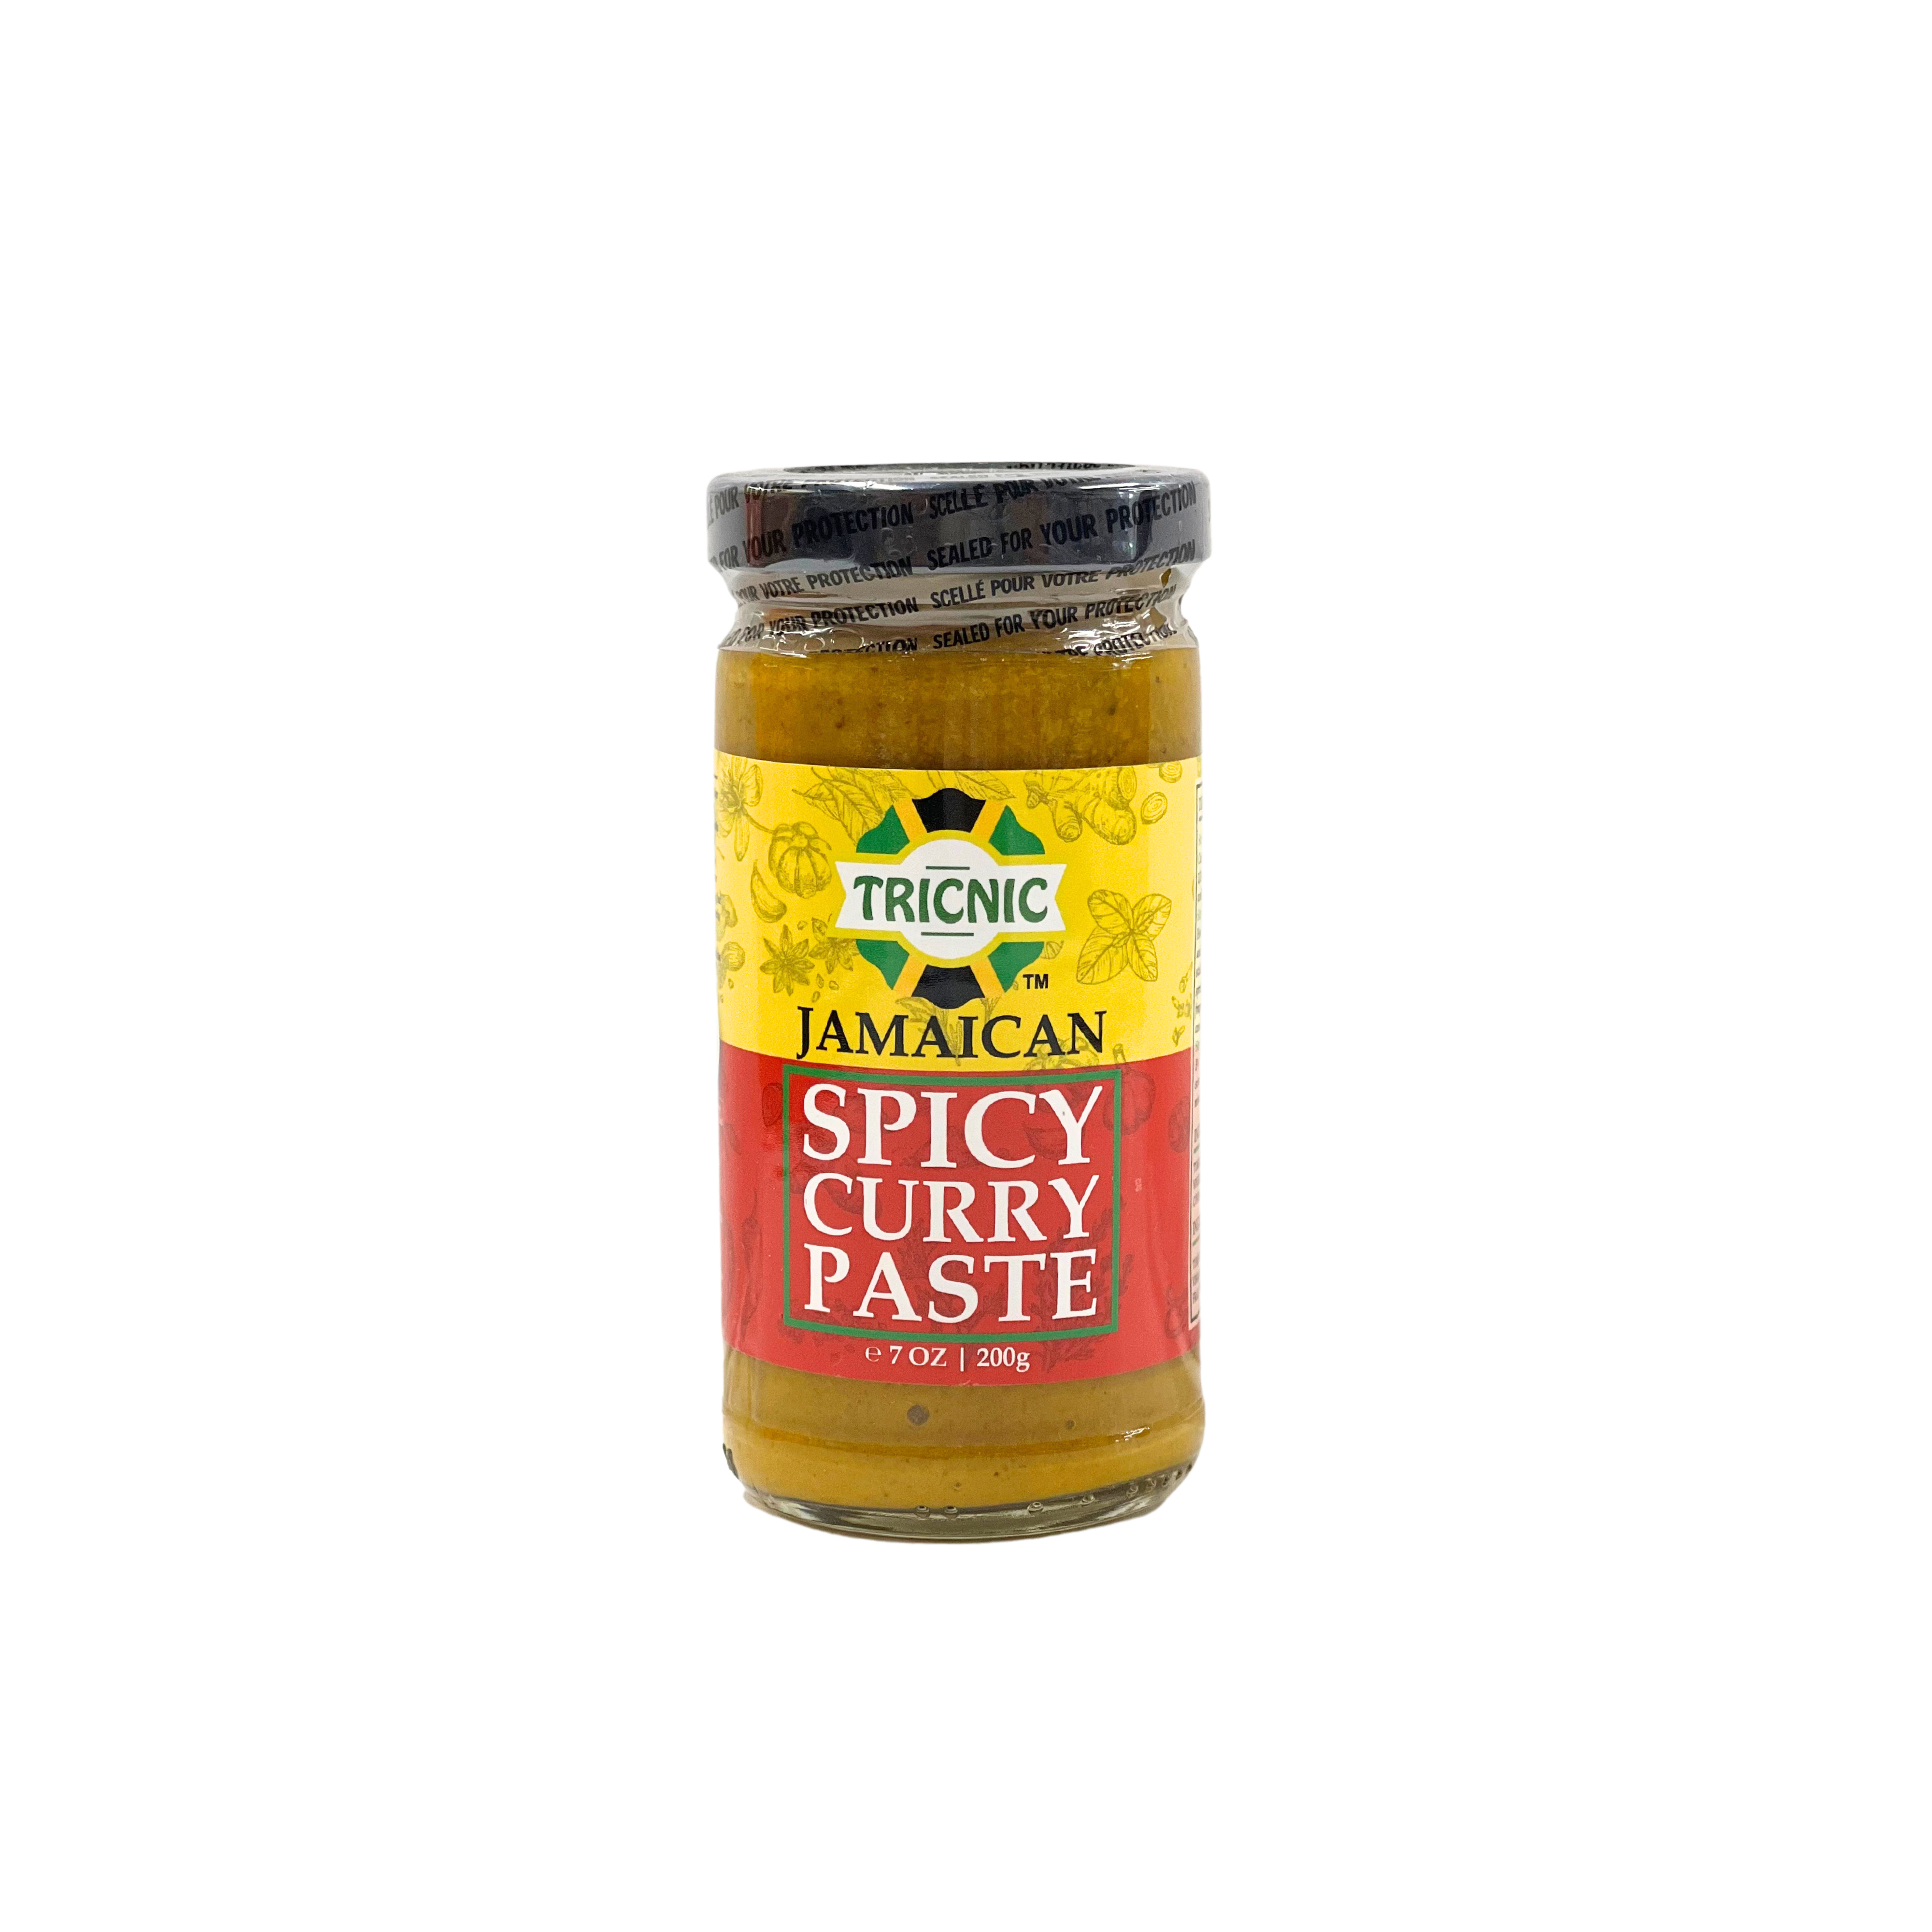 Tricnic Spicy Curry Paste 200g